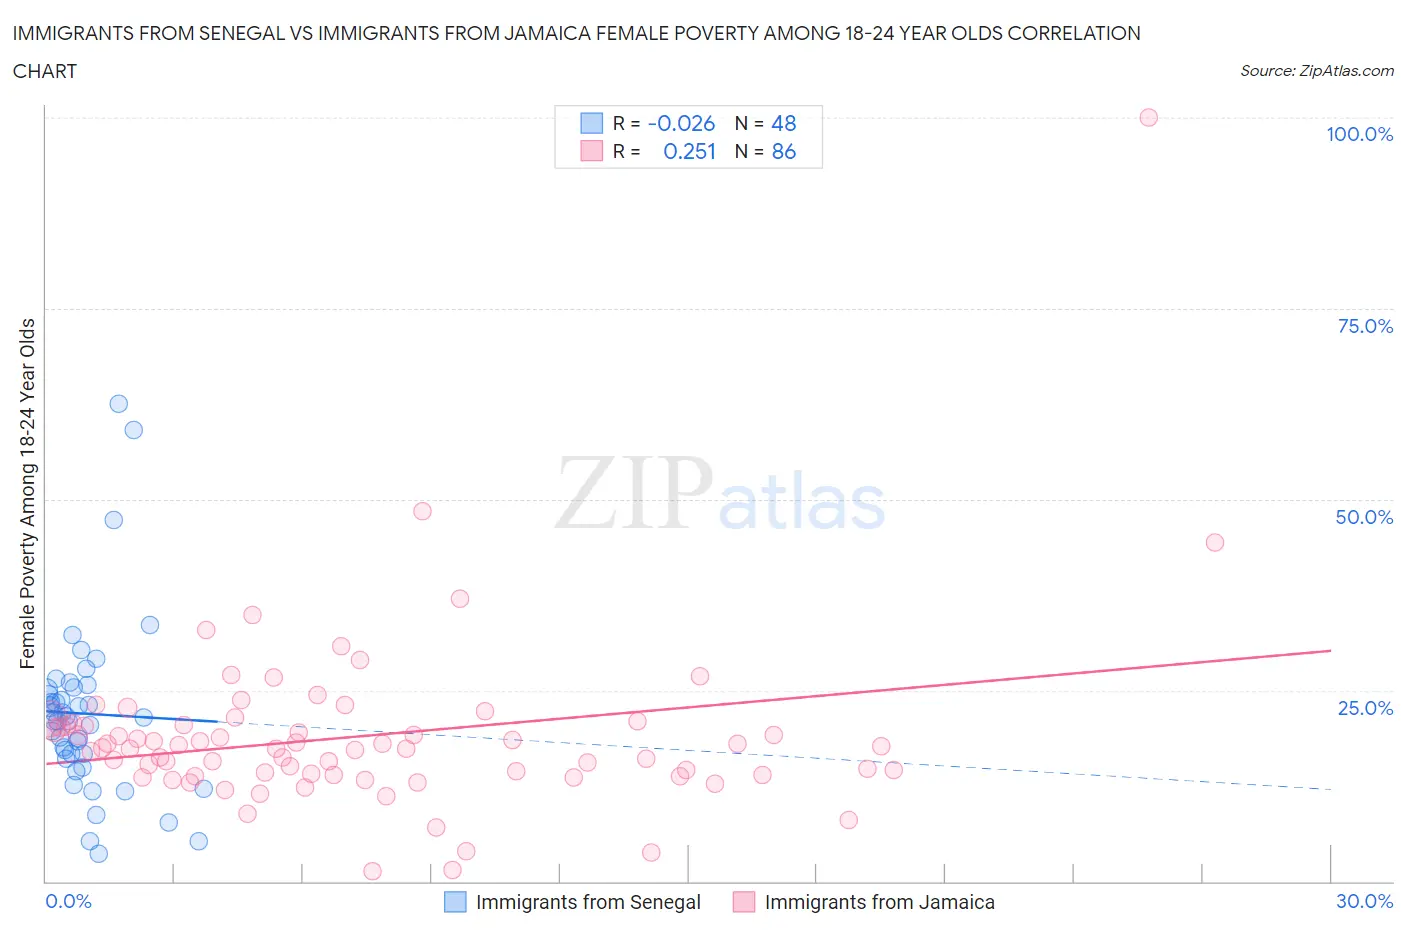 Immigrants from Senegal vs Immigrants from Jamaica Female Poverty Among 18-24 Year Olds